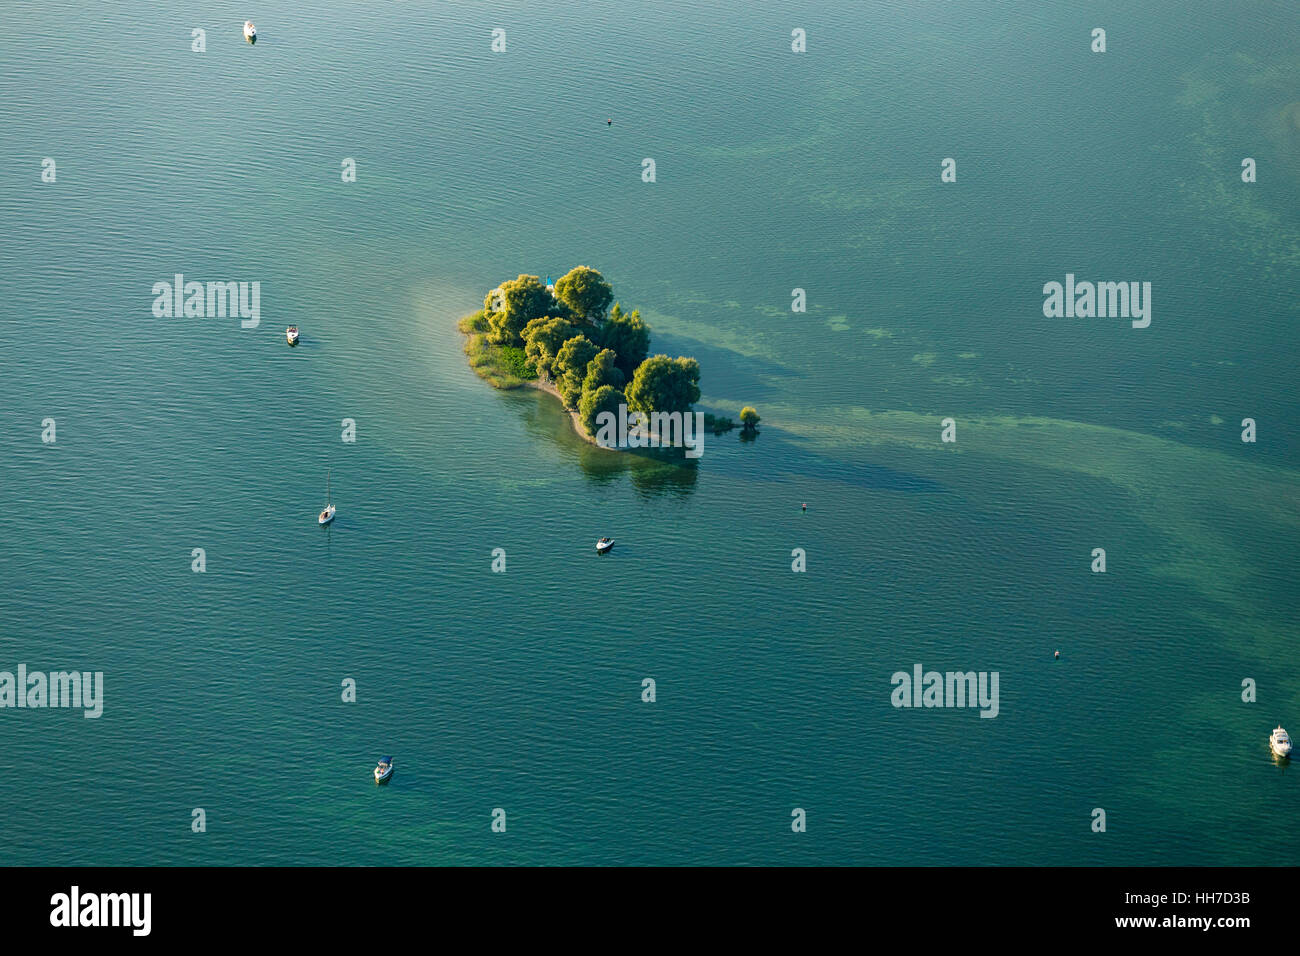 Love Island, Radolfzell, Lac de Constance, Bade-Wurtemberg, Allemagne Banque D'Images